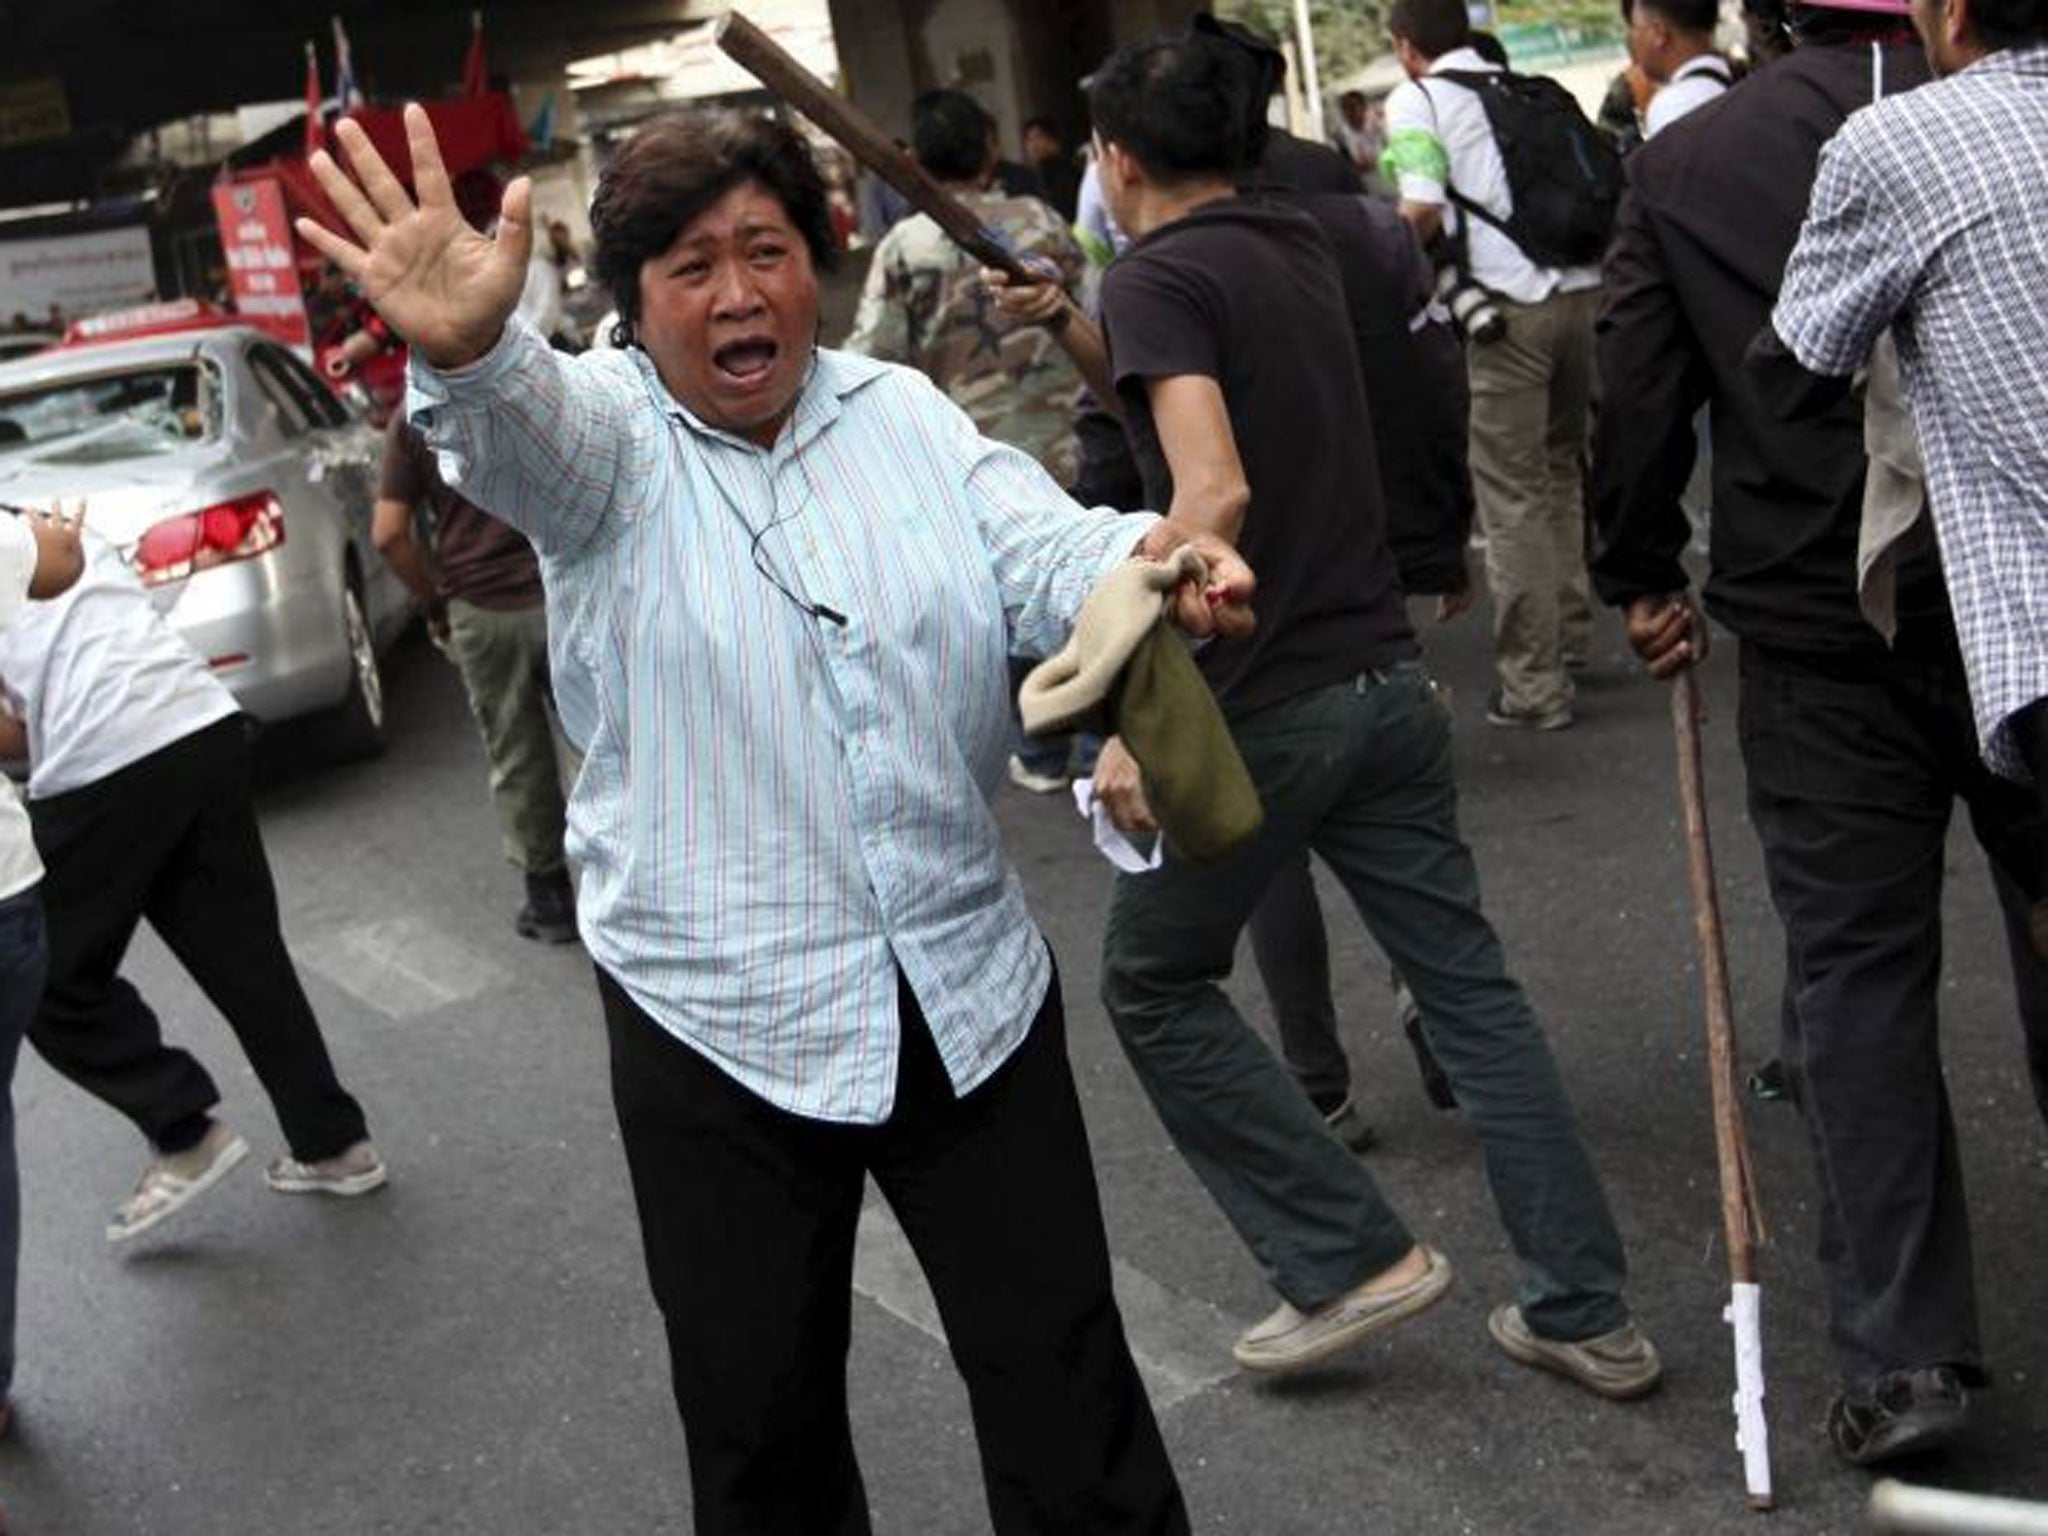 Protesters clash yesterday at a polling station in Bangkok’s Lak Si district